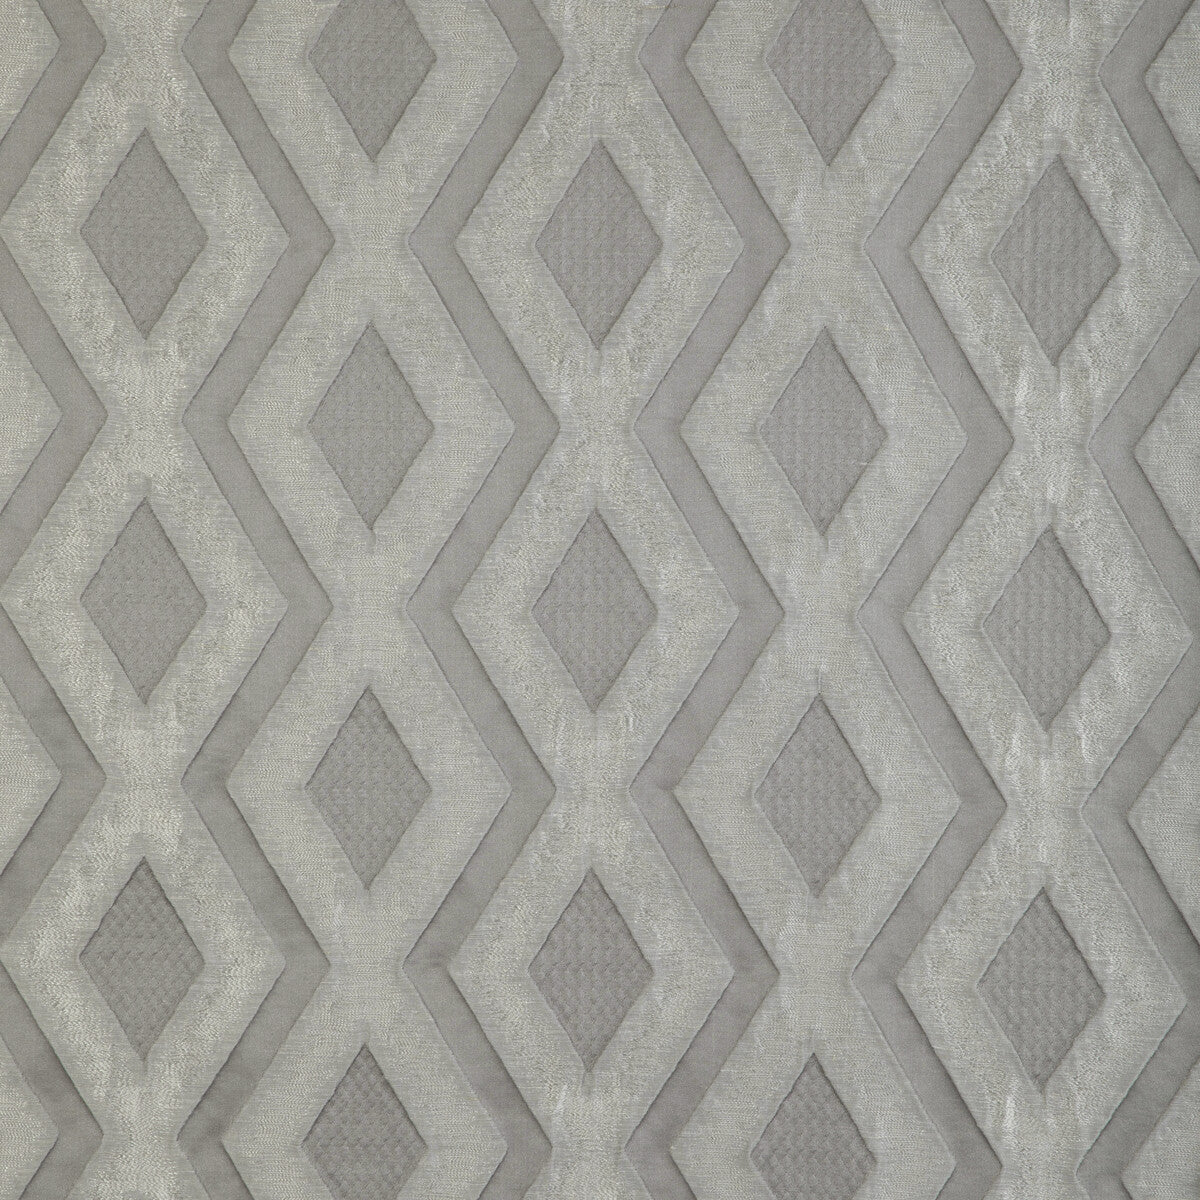 Flawless fabric in silver color - pattern 36839.11.0 - by Kravet Design in the Candice Olson collection